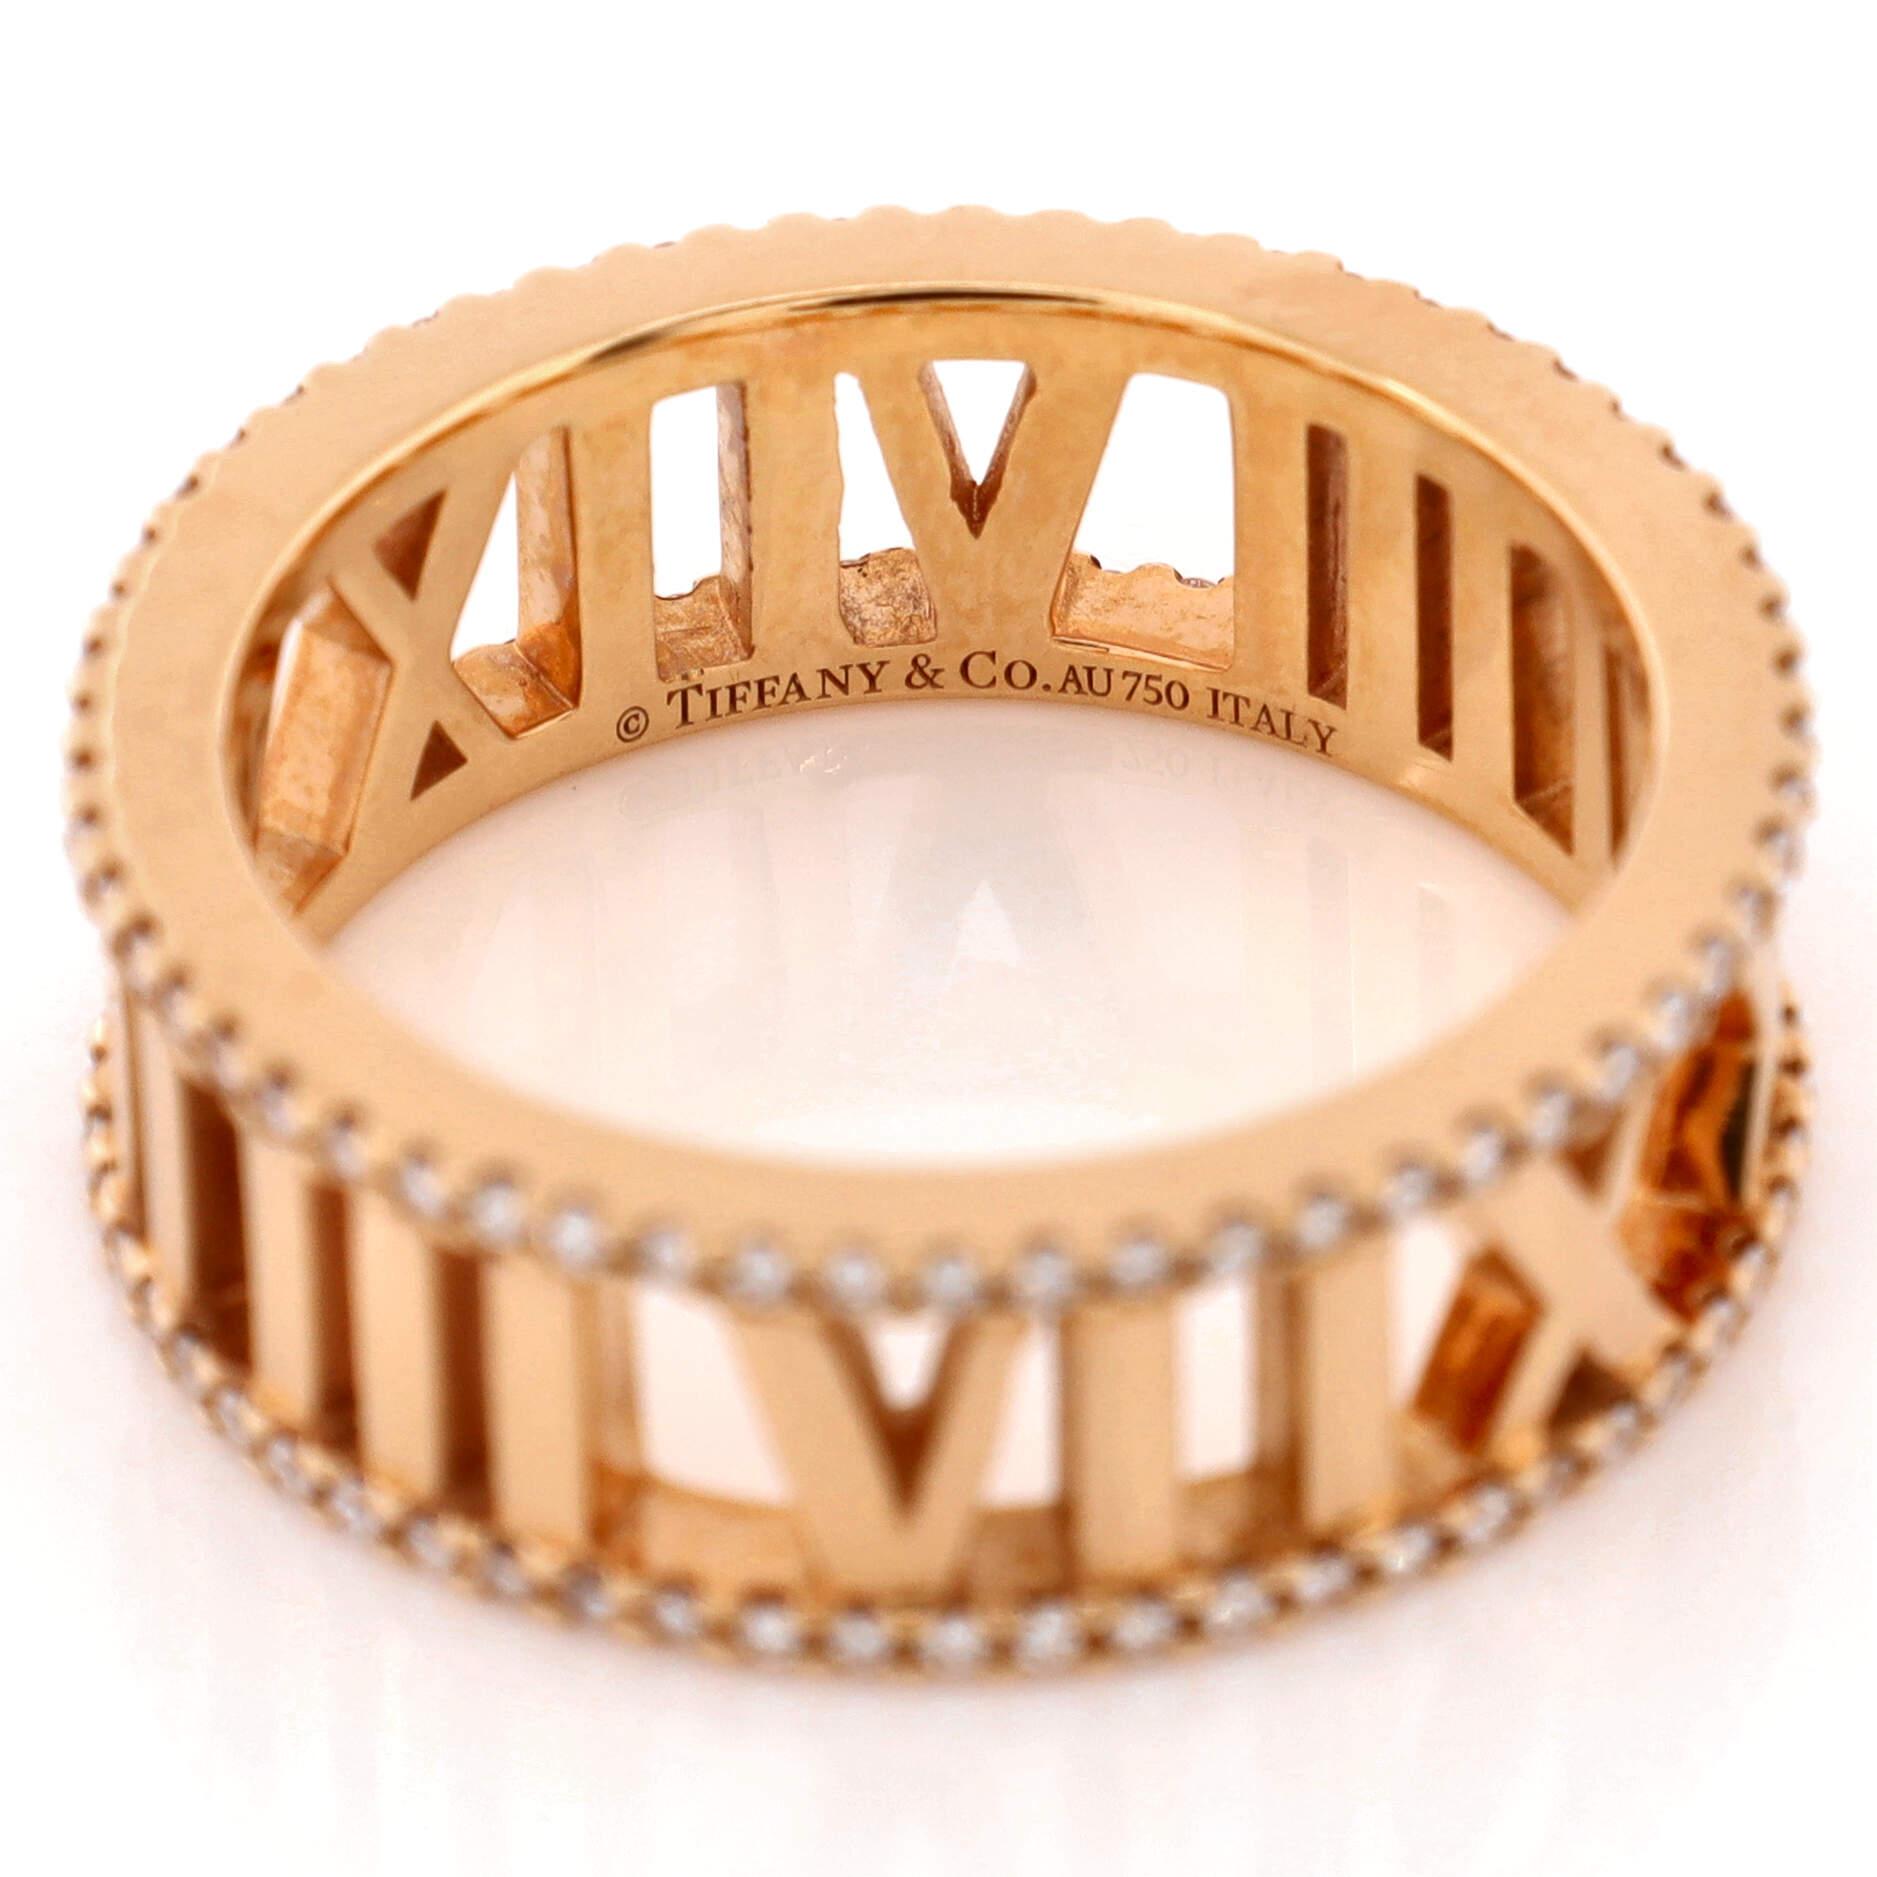 Tiffany & Co. Atlas Open Ring 18K Rose Gold with Diamond 7mm In Good Condition For Sale In New York, NY